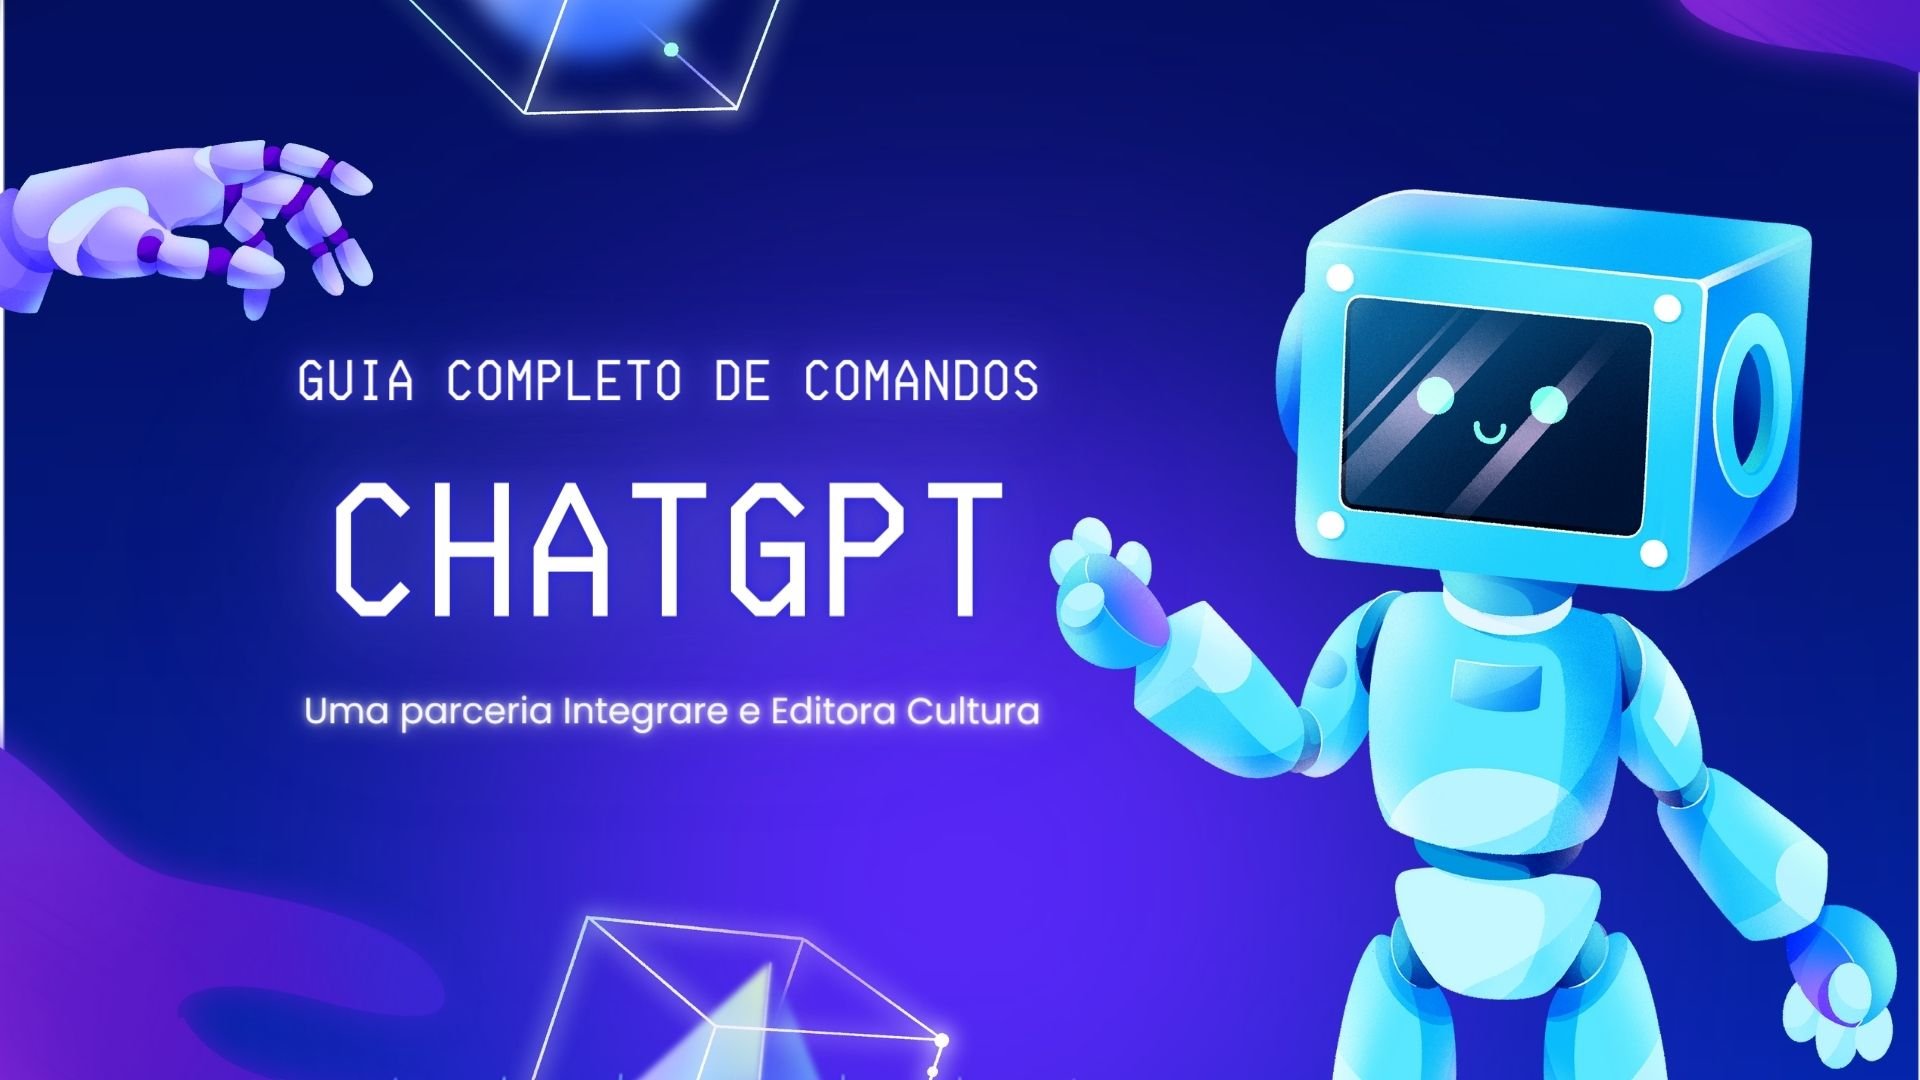 ChatGPT command guide promotion with cartoon robot illustration.